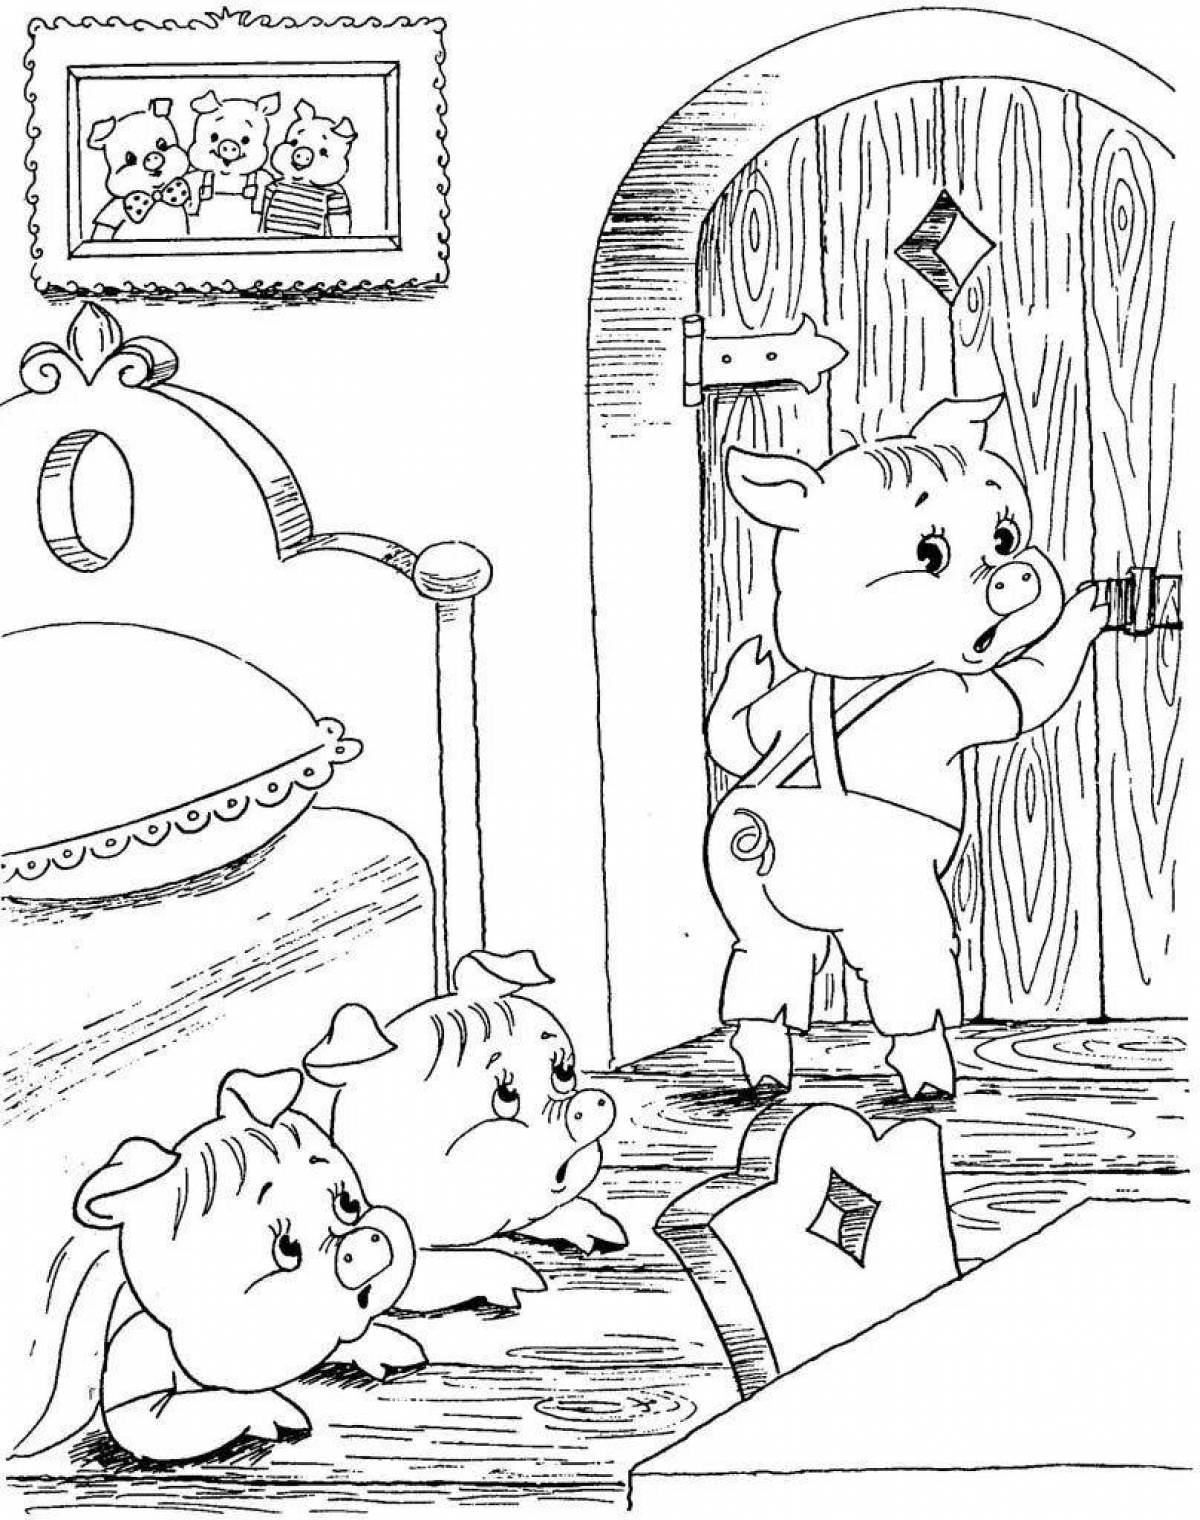 Three little pigs coloring book for children 3-4 years old